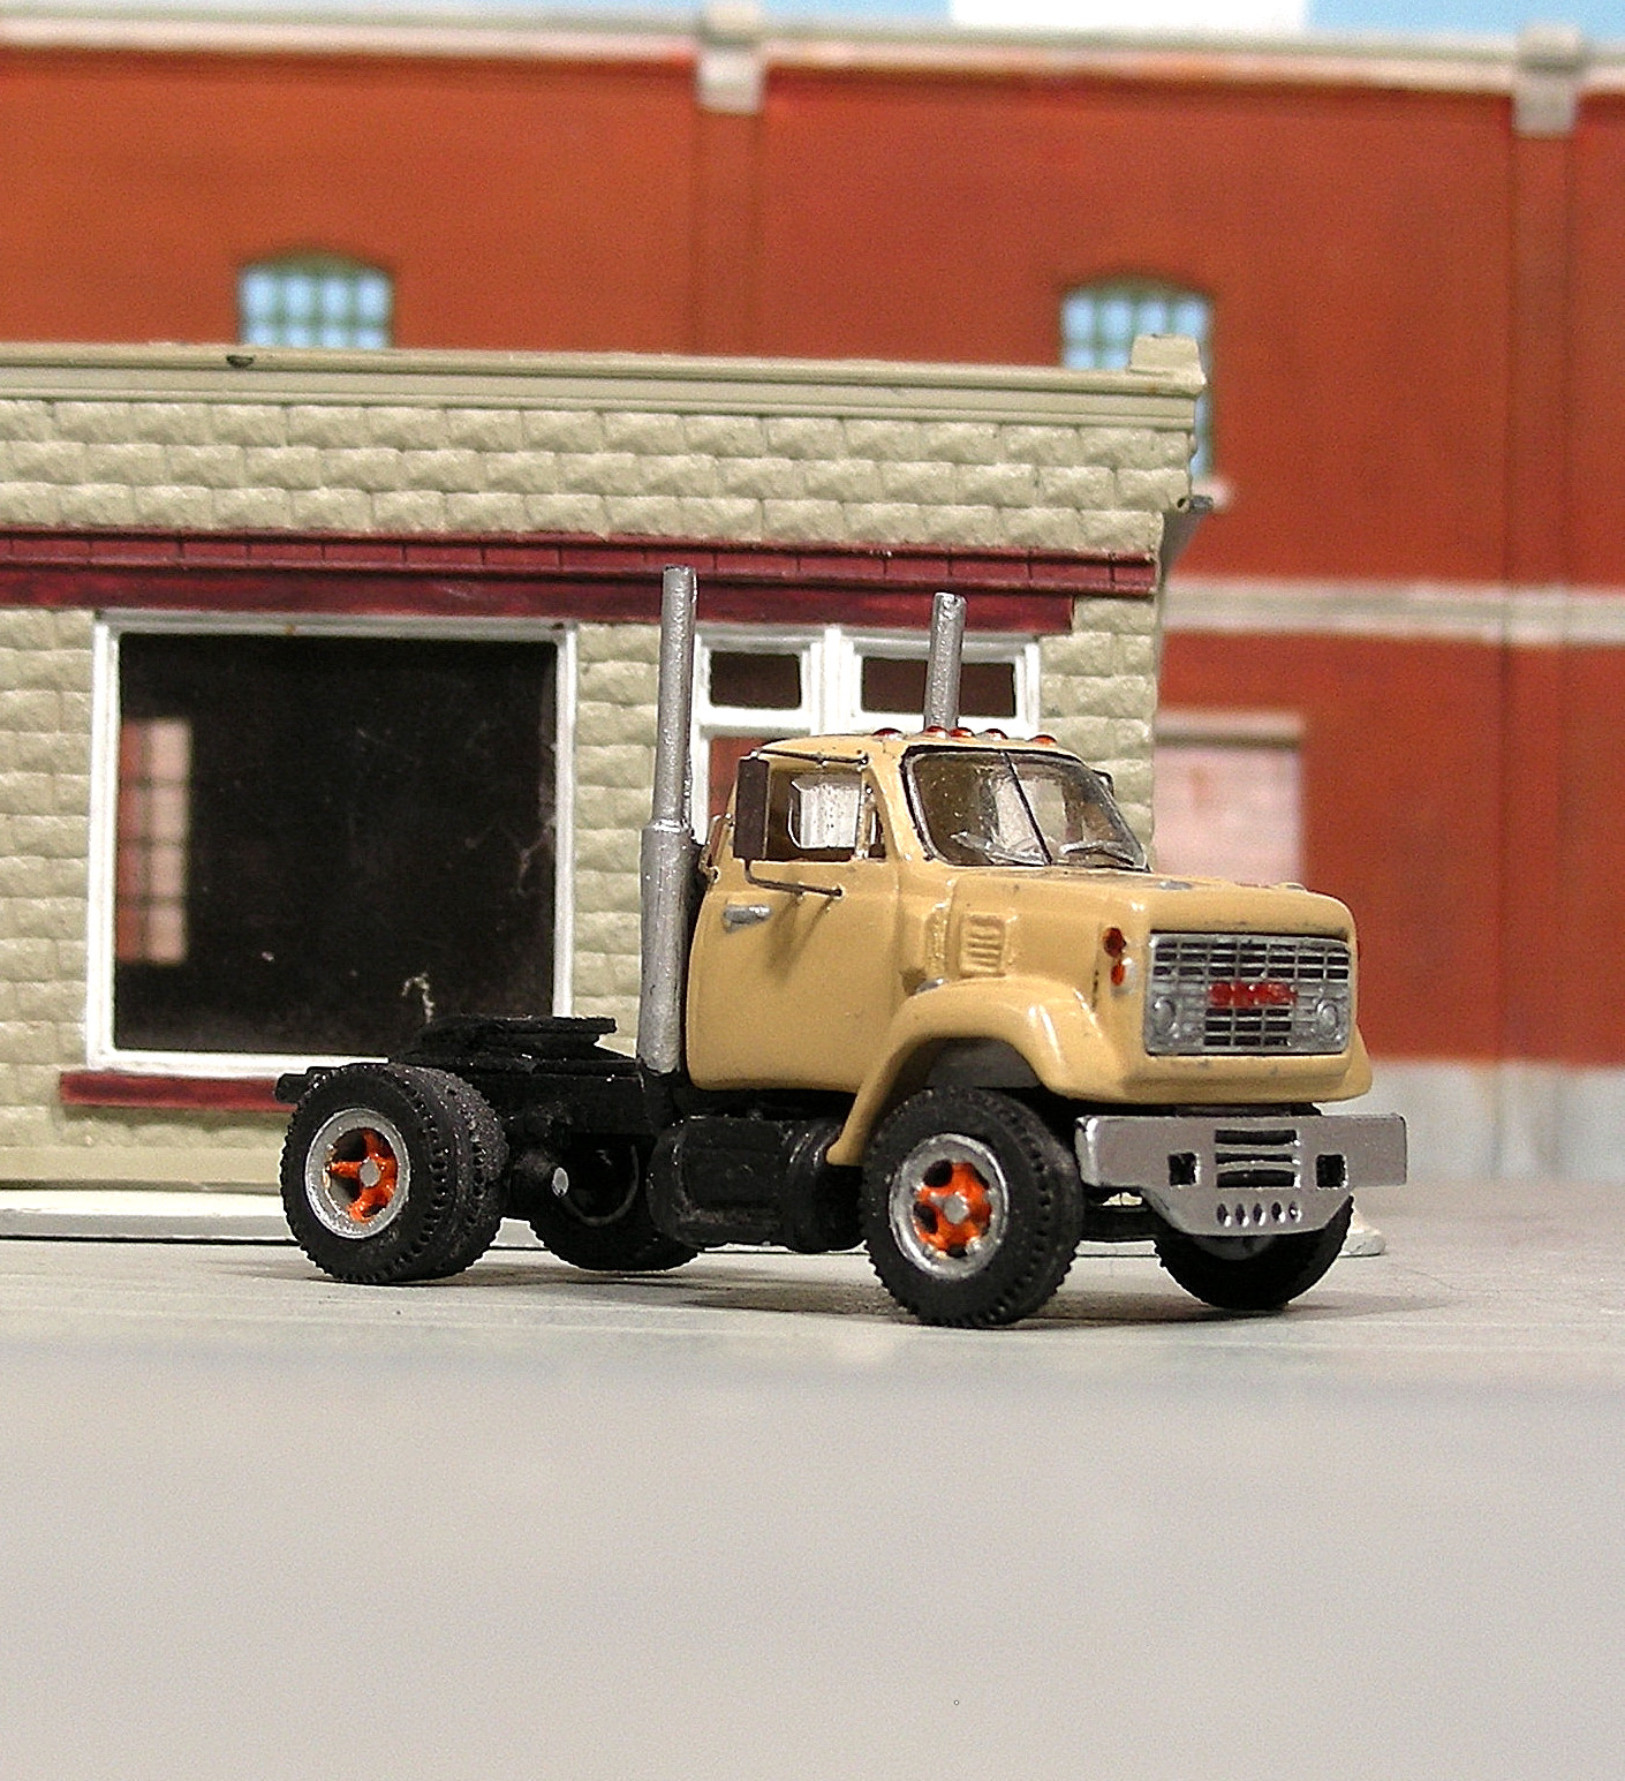 Sylvan Scale Models V-383 HO Scale - 1966-77 GMC 9500 High Mount Cab Tandem Axle Short Hood Tractor - Unpainted and Resin Cast Kit   